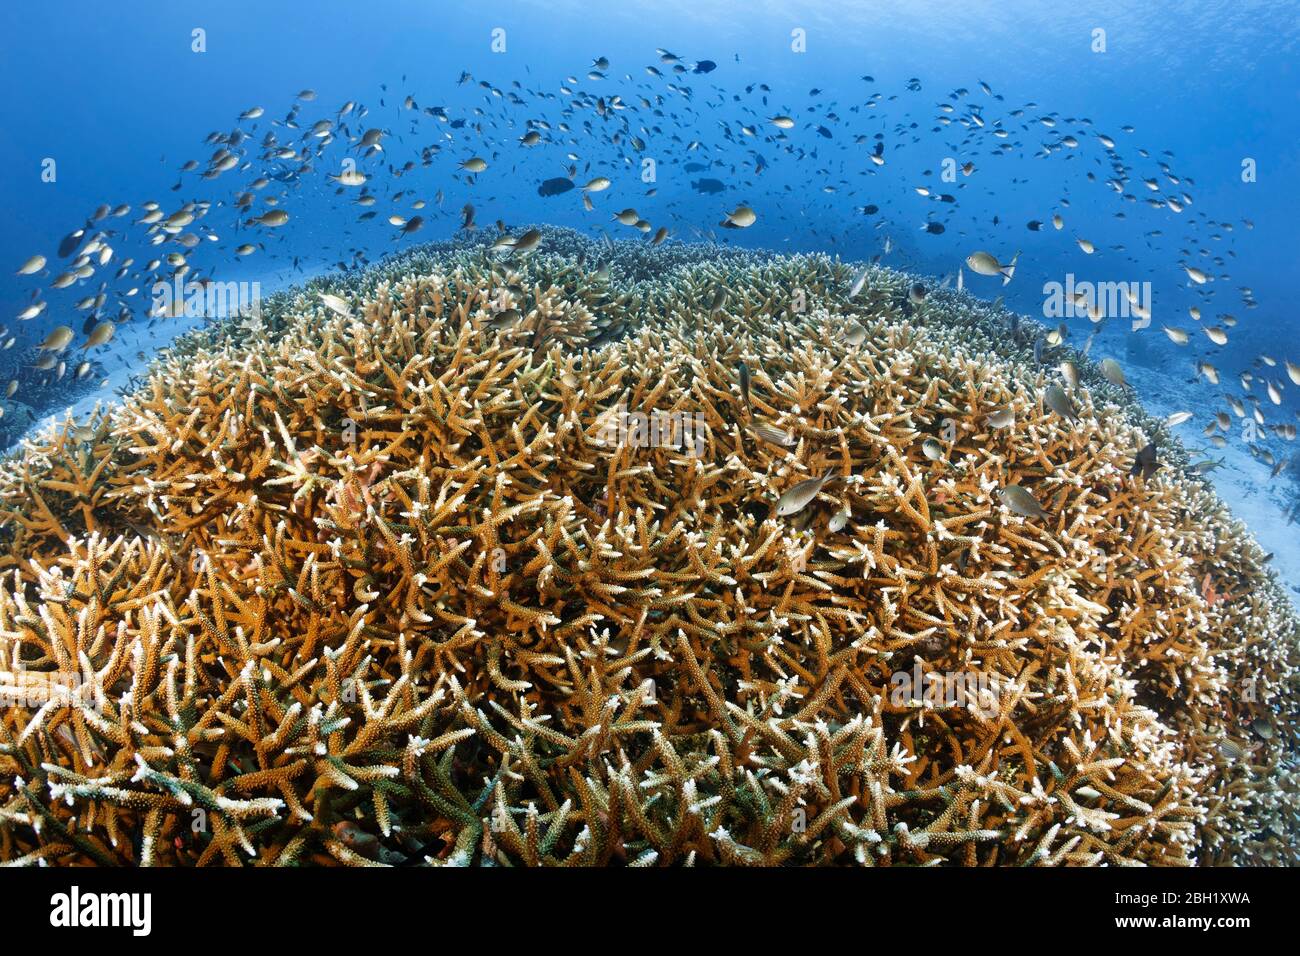 Coral reef, dense branches of Acropora stony coraln (Acropora spinosa), shoal of reef perch, Damselfish (Chromis leptolepis), Pacific, Sulu Sea Stock Photo